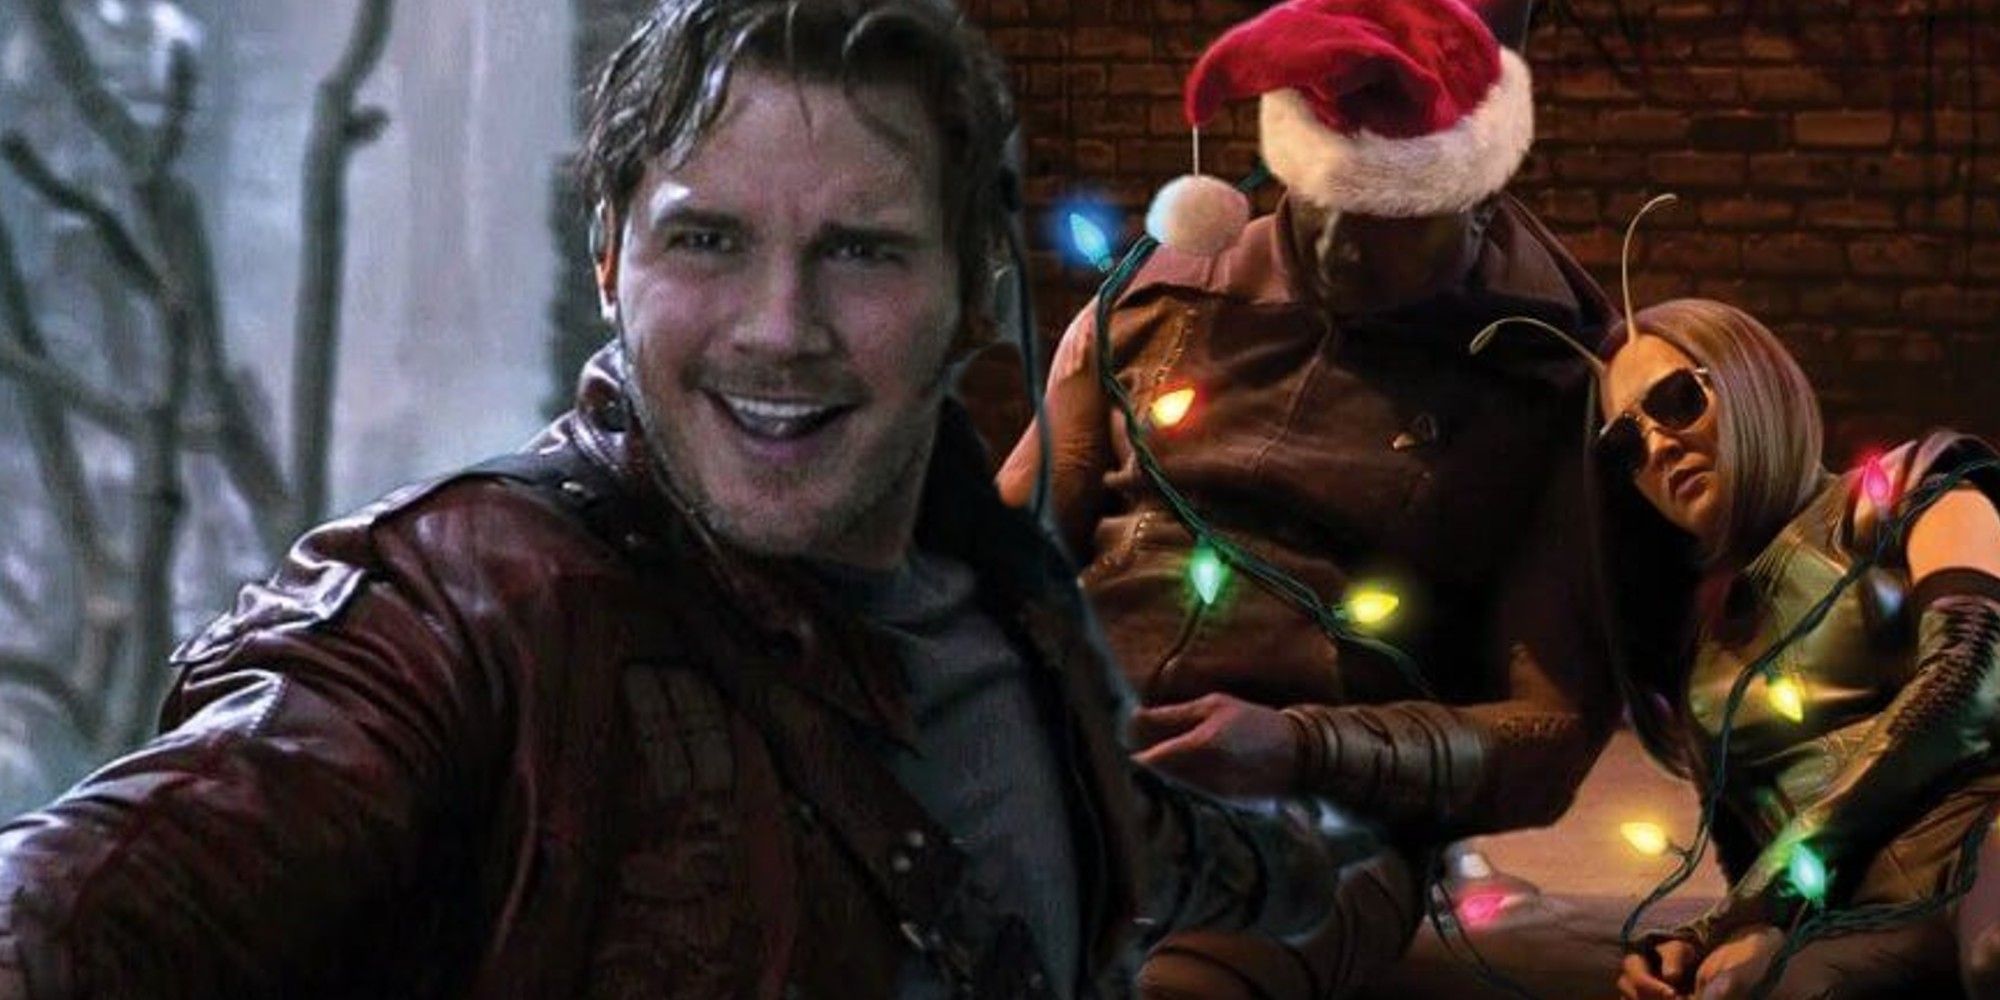 The Guardians of the Galaxy Holiday Special Chris Pratt Dave Bautista and Pom Klementieff as Star Lord Drax and Mantis